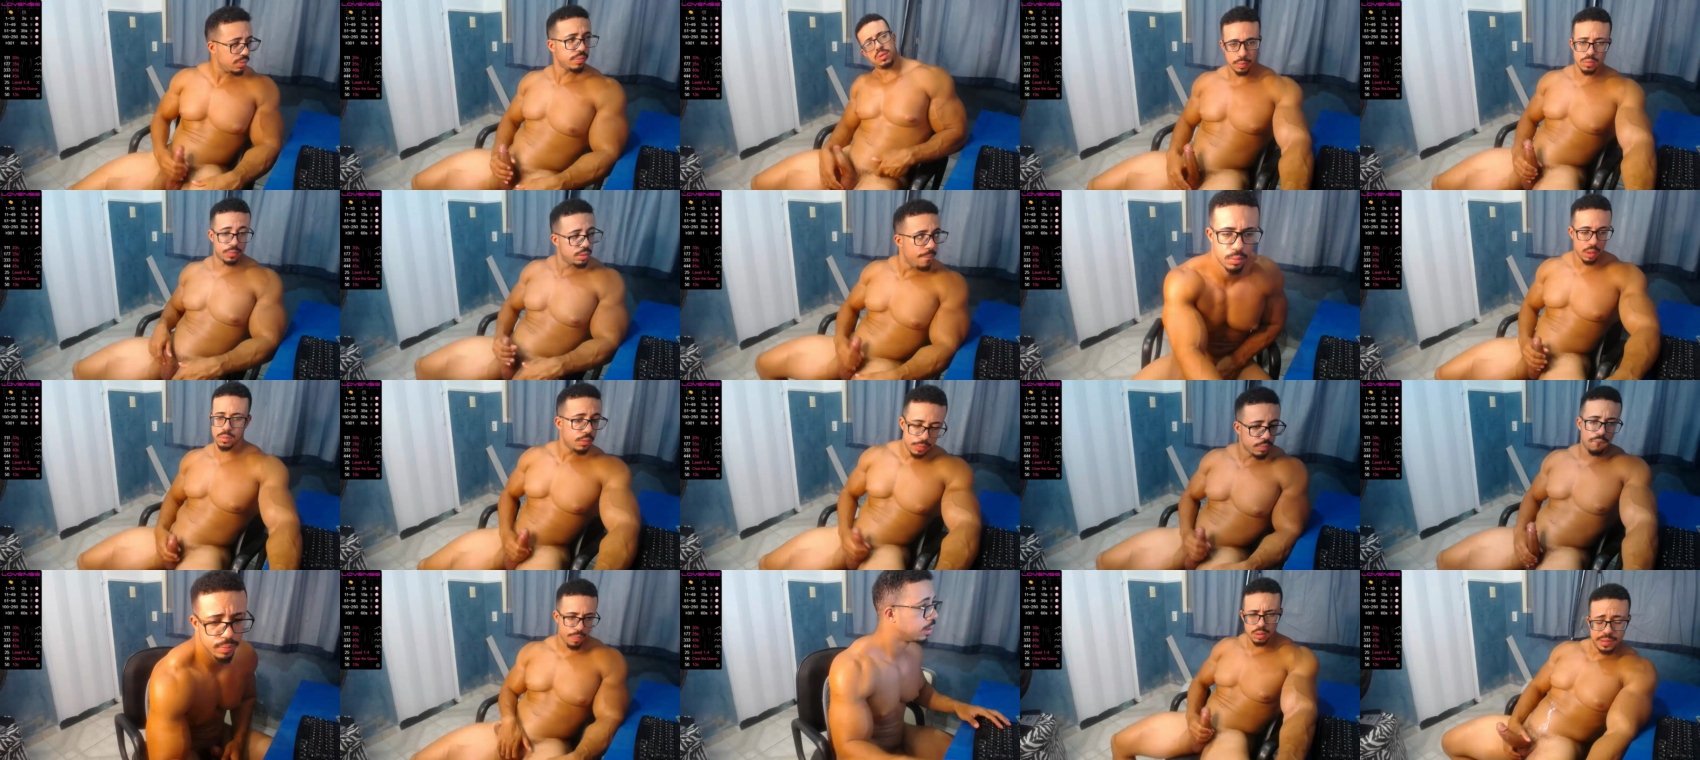 mikehotk  24-01-2022 video nude